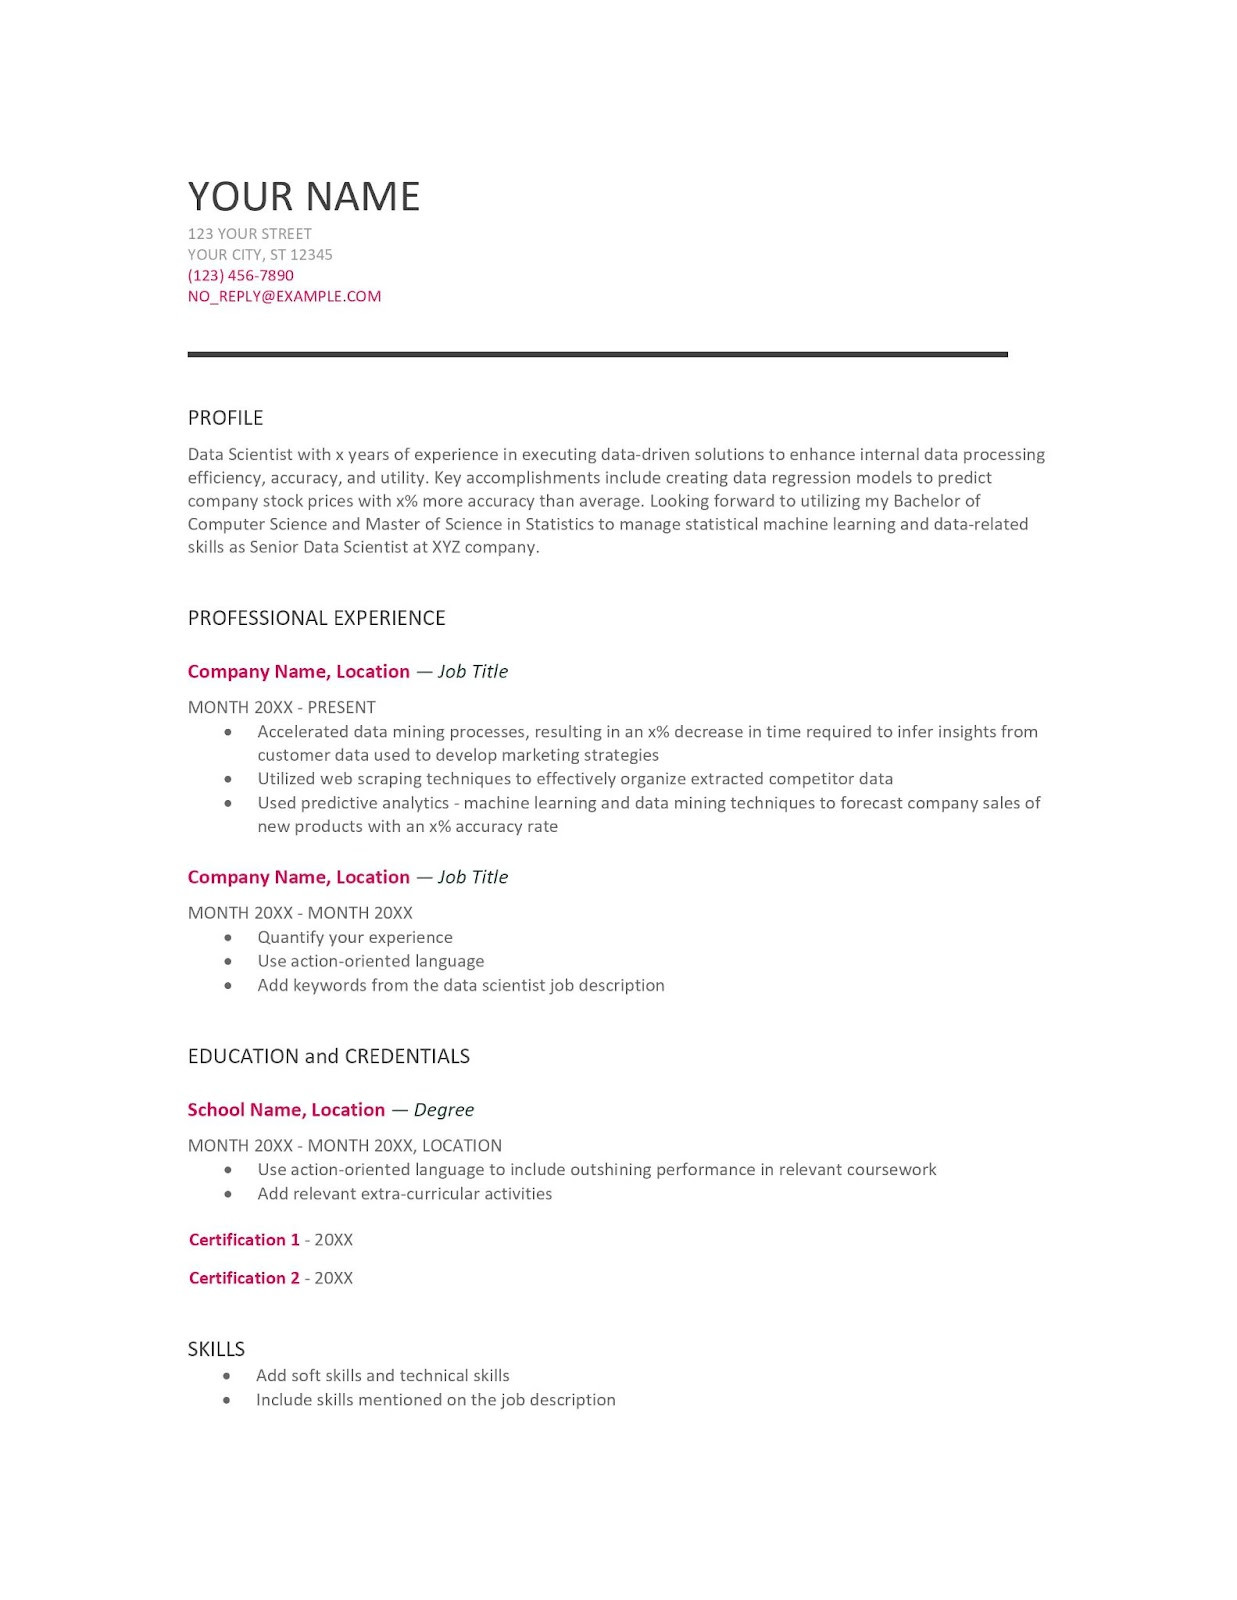 First Data Science Job Resume Sample How to Create An Impressive Data Scientist Resume